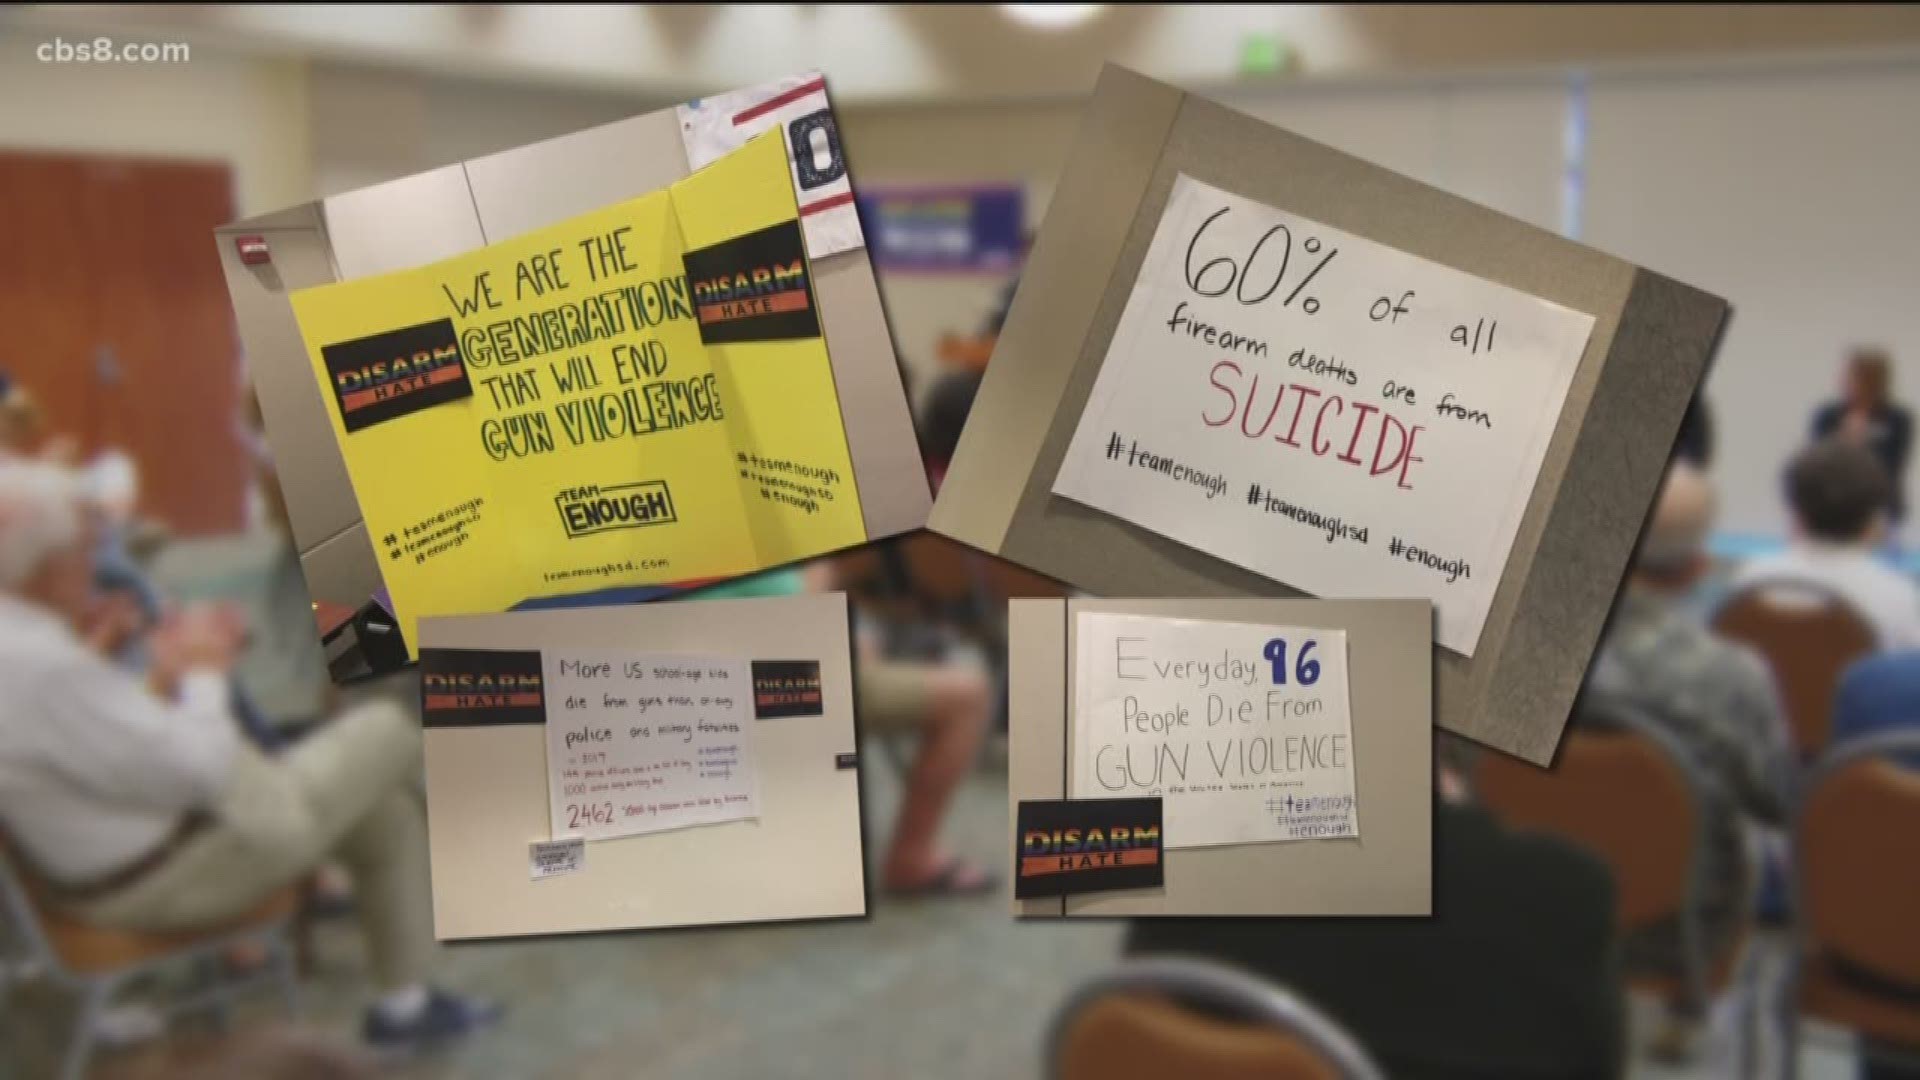 Students from seven North County San Diego high schools worked on the event inviting elected officials and representatives from gun violence prevention organizations